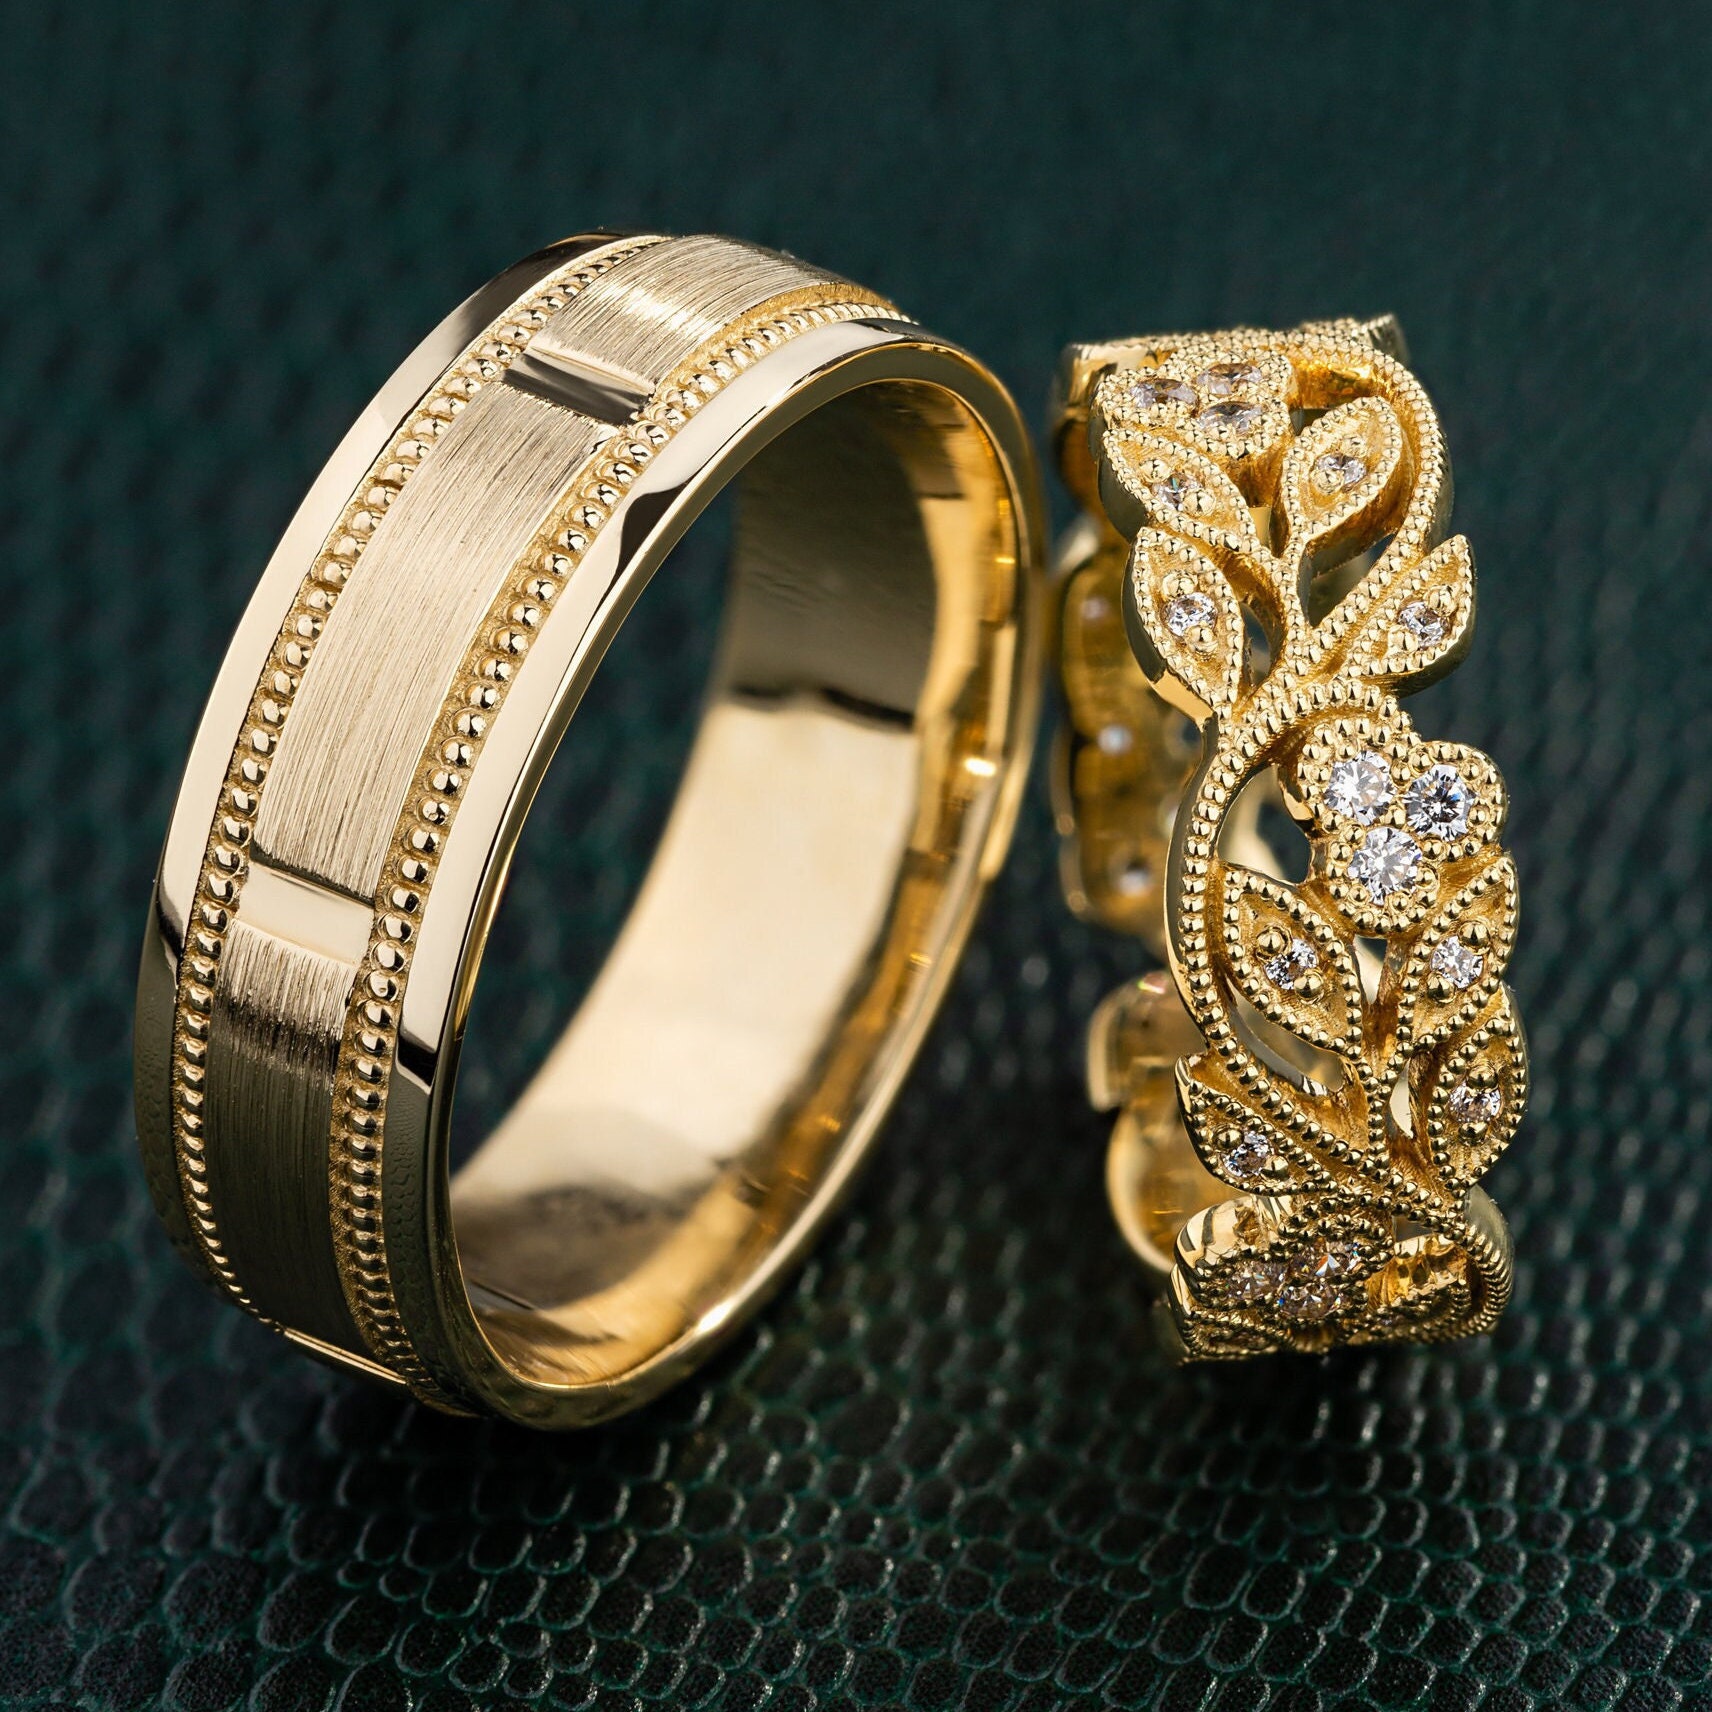 Adjustable Gold Dragon And Phoenix Diamond Engagement Ring For Women  Perfect Gold Russian Wedding Ring Accessory From Bestgold, $6.15 |  DHgate.Com